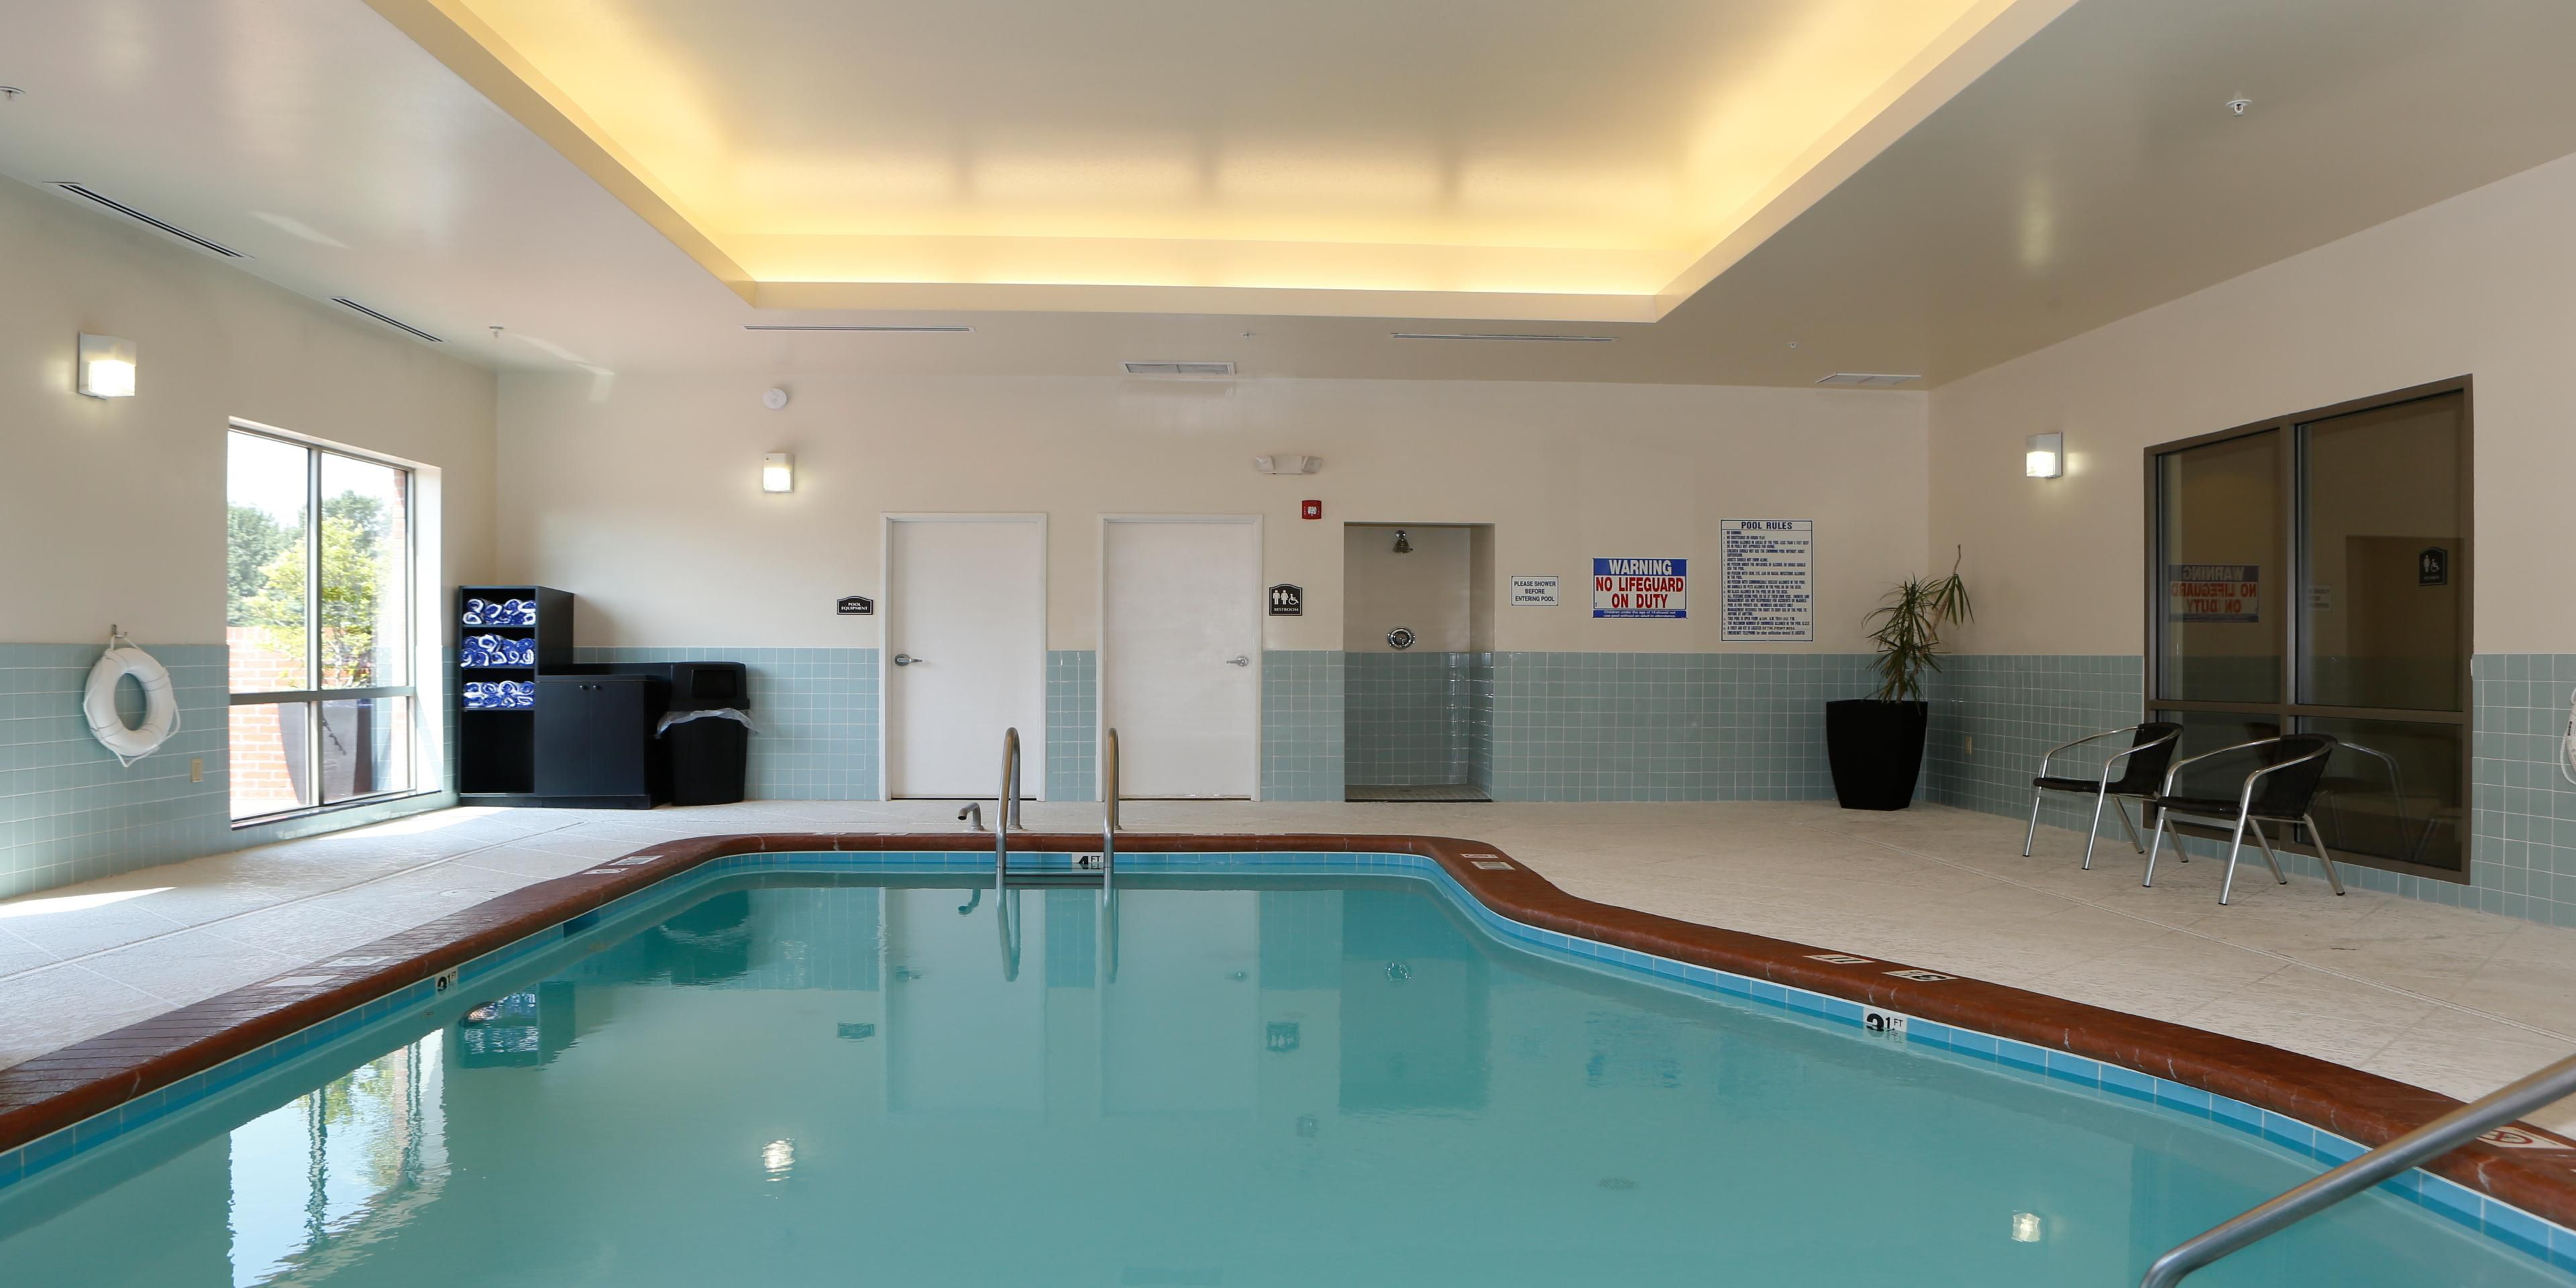 Our Indoor Heated Saltwater Pool is open year round from 6am to 10pm daily. Kick back and relax with your family and enjoy a pool day, no matter the weather! 